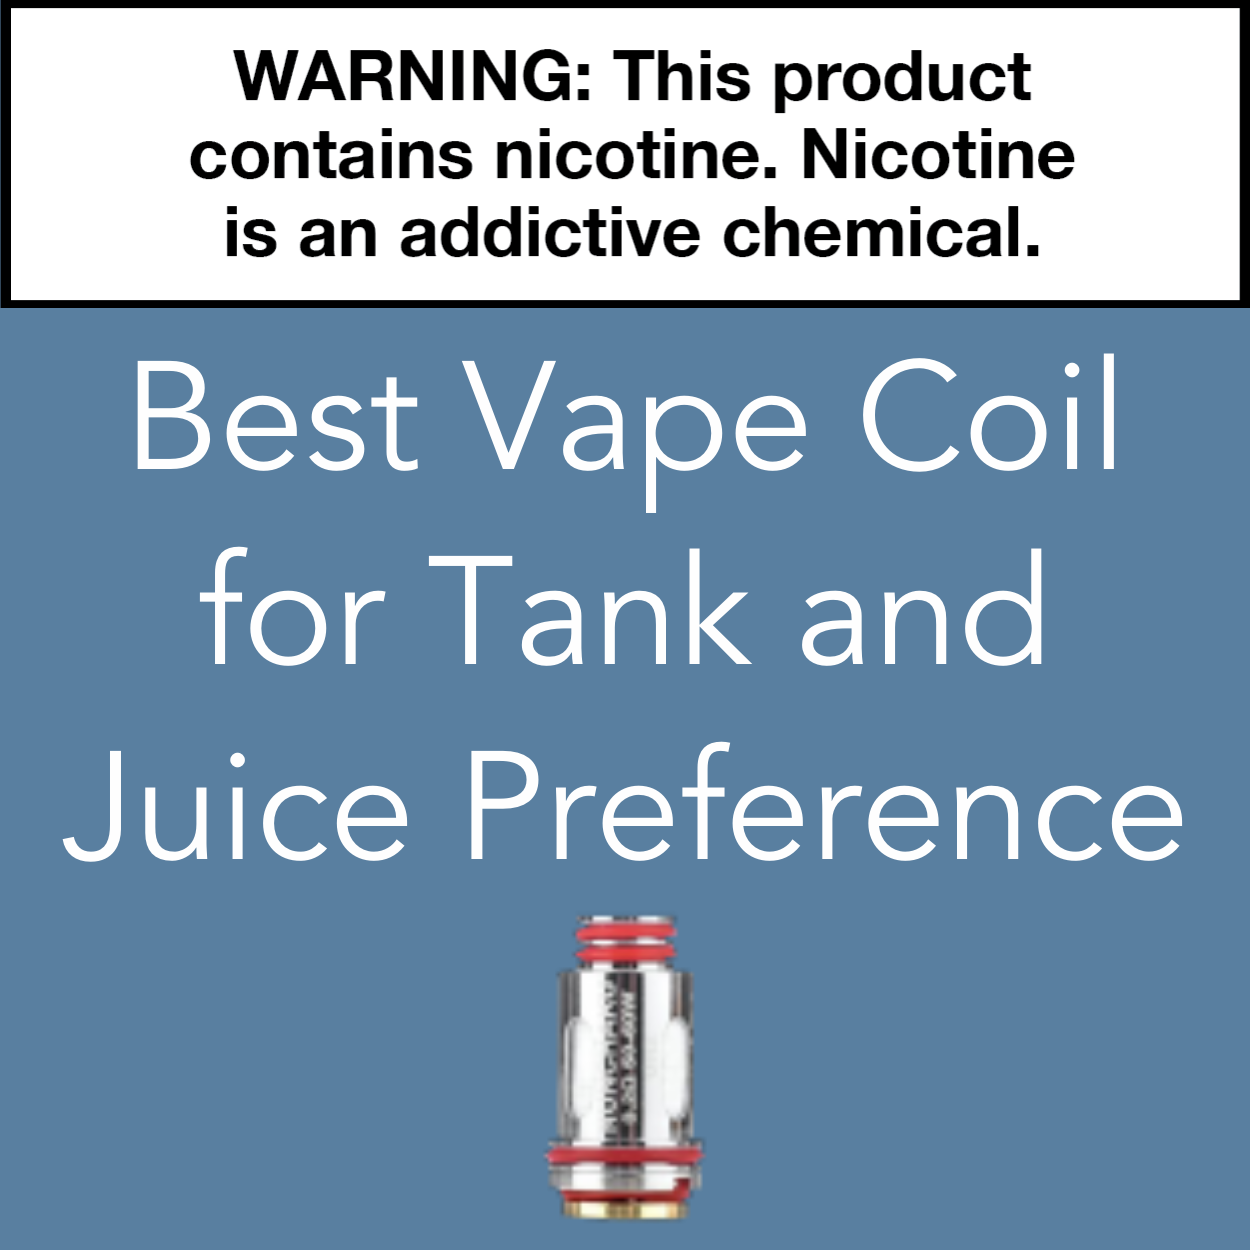 Best Vape Coil for Tank and Juice Preference